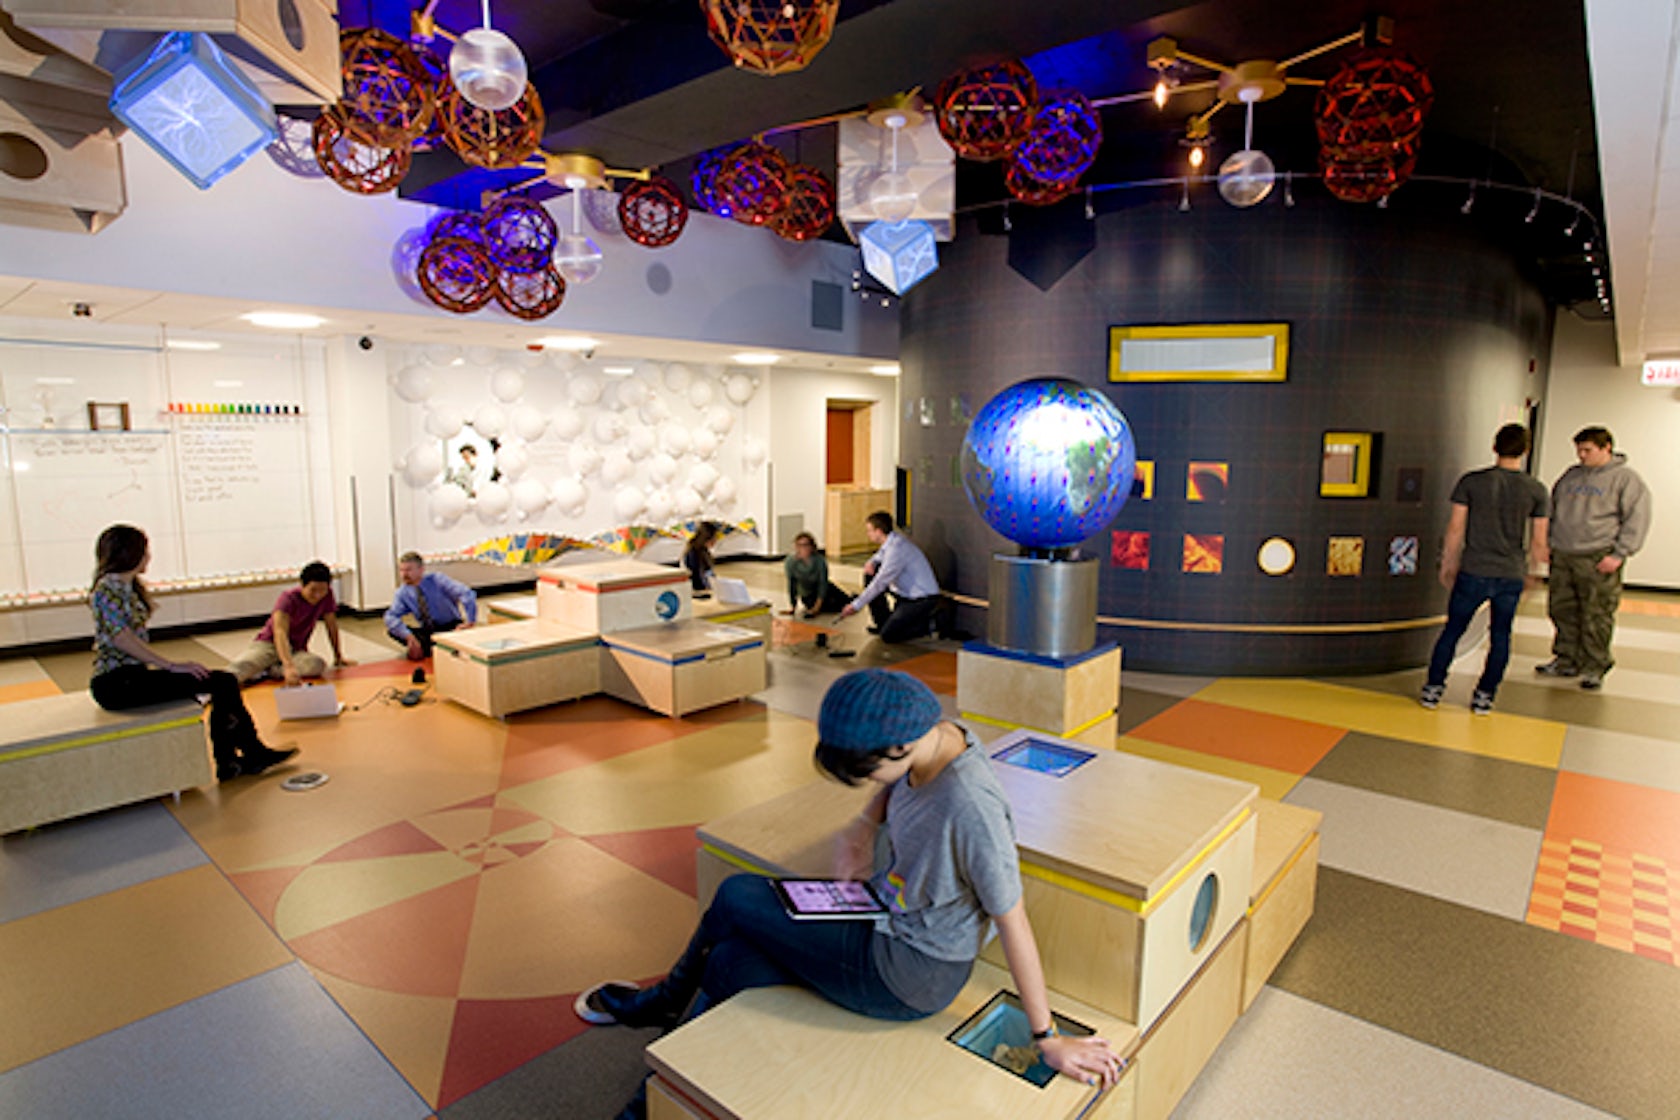 latin-school-of-chicago-interactive-science-forum-by-nhdkmp-architects-architecture-is-fun